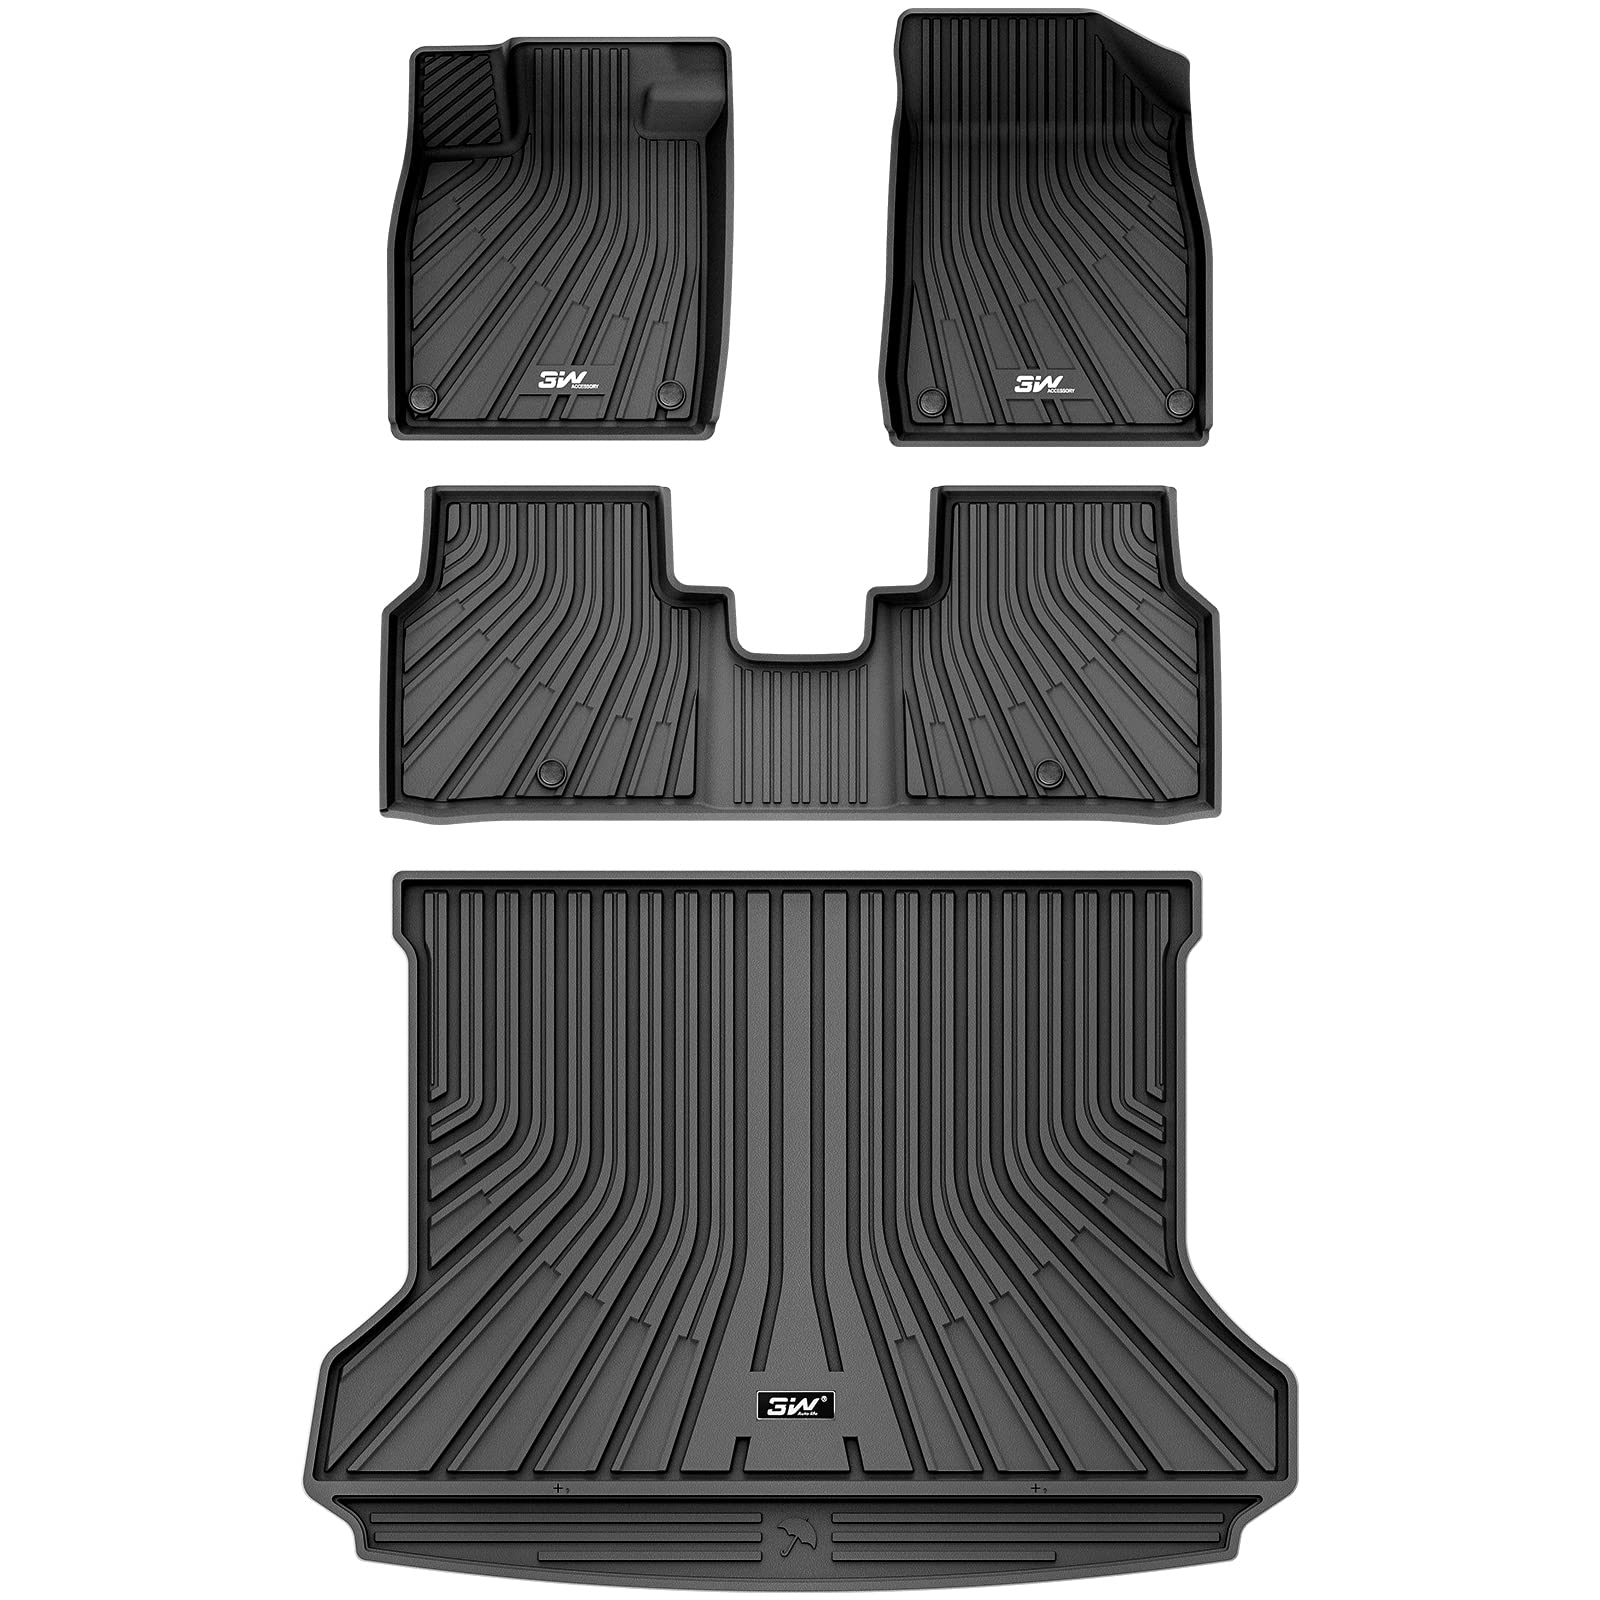 3W Volkswagen ID.4 2021-2023 Custom Floor Mats TPE Material & All-Weather Protection Vehicles & Parts 3Wliners 2021-2023 ID.4 2021-2023 1st&2nd Row Mats+Rear Trunk Mat